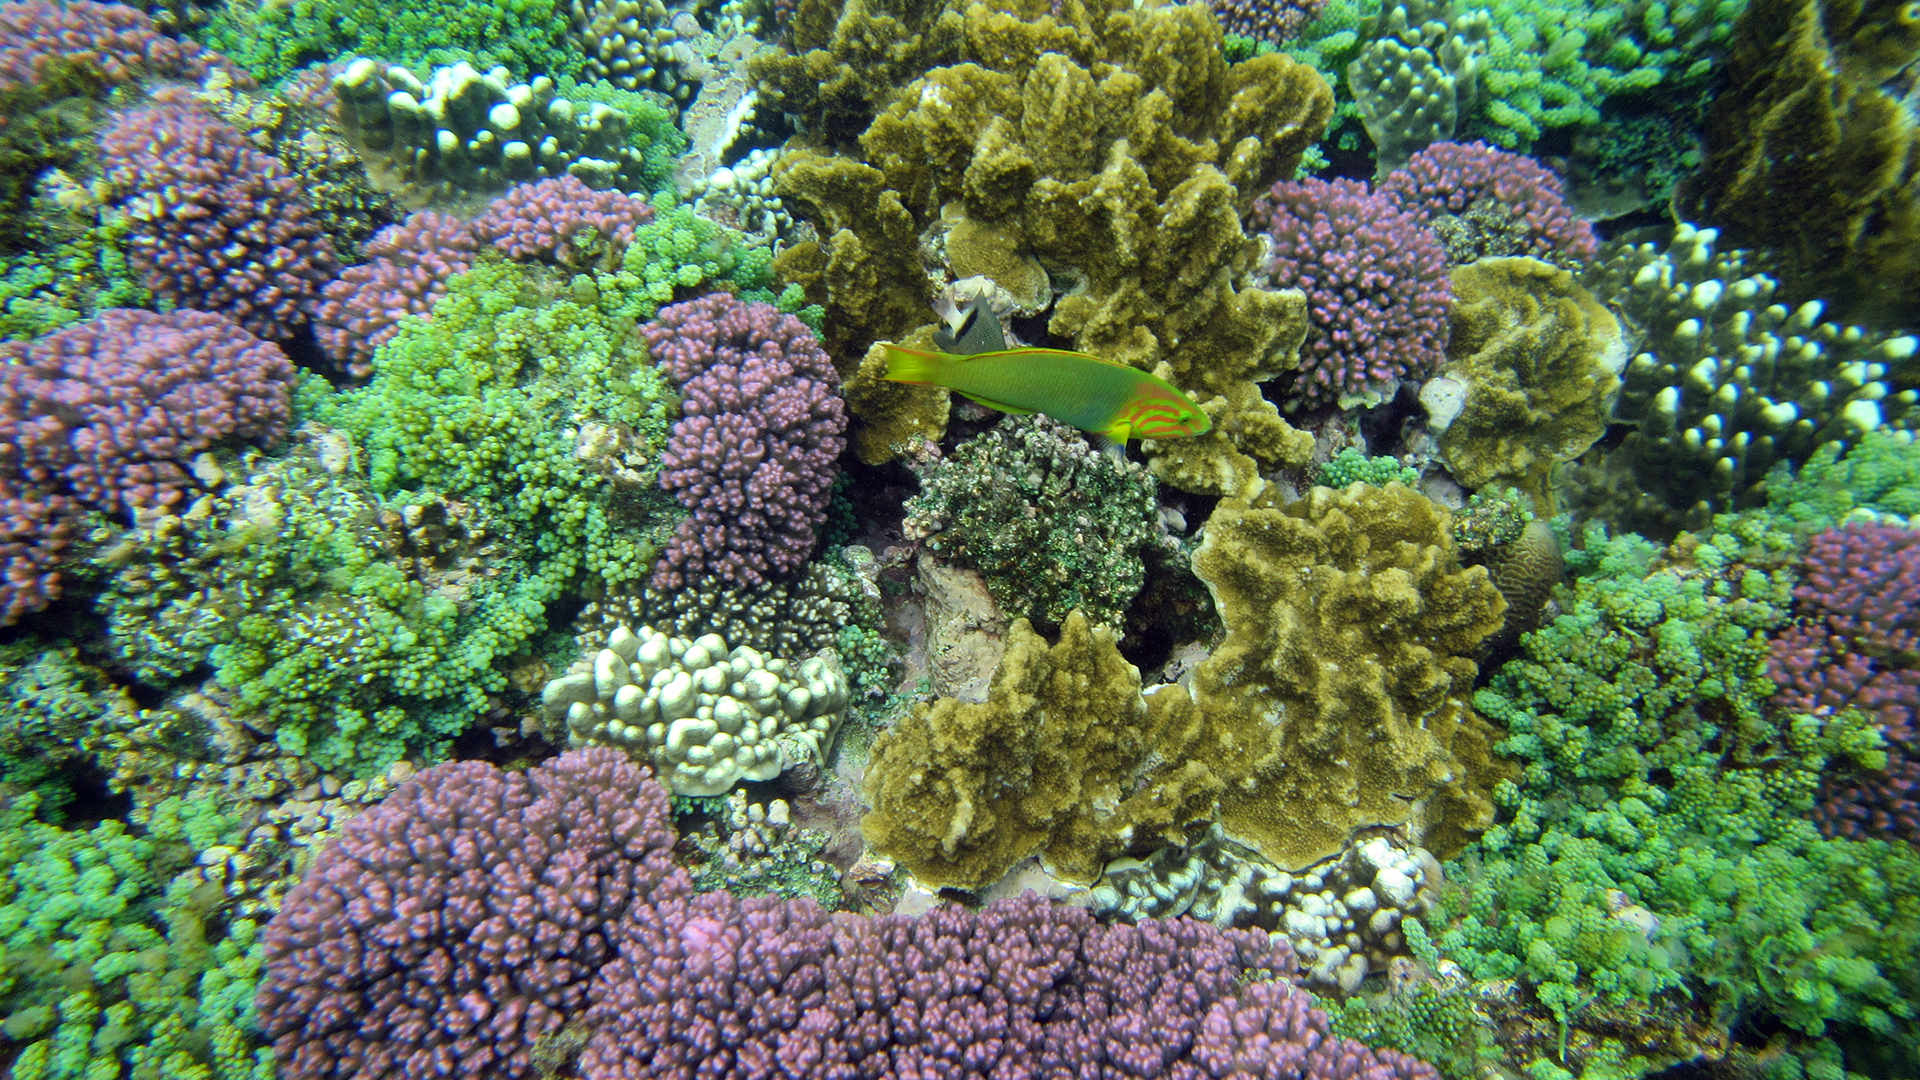 Coral and colourful fish abound